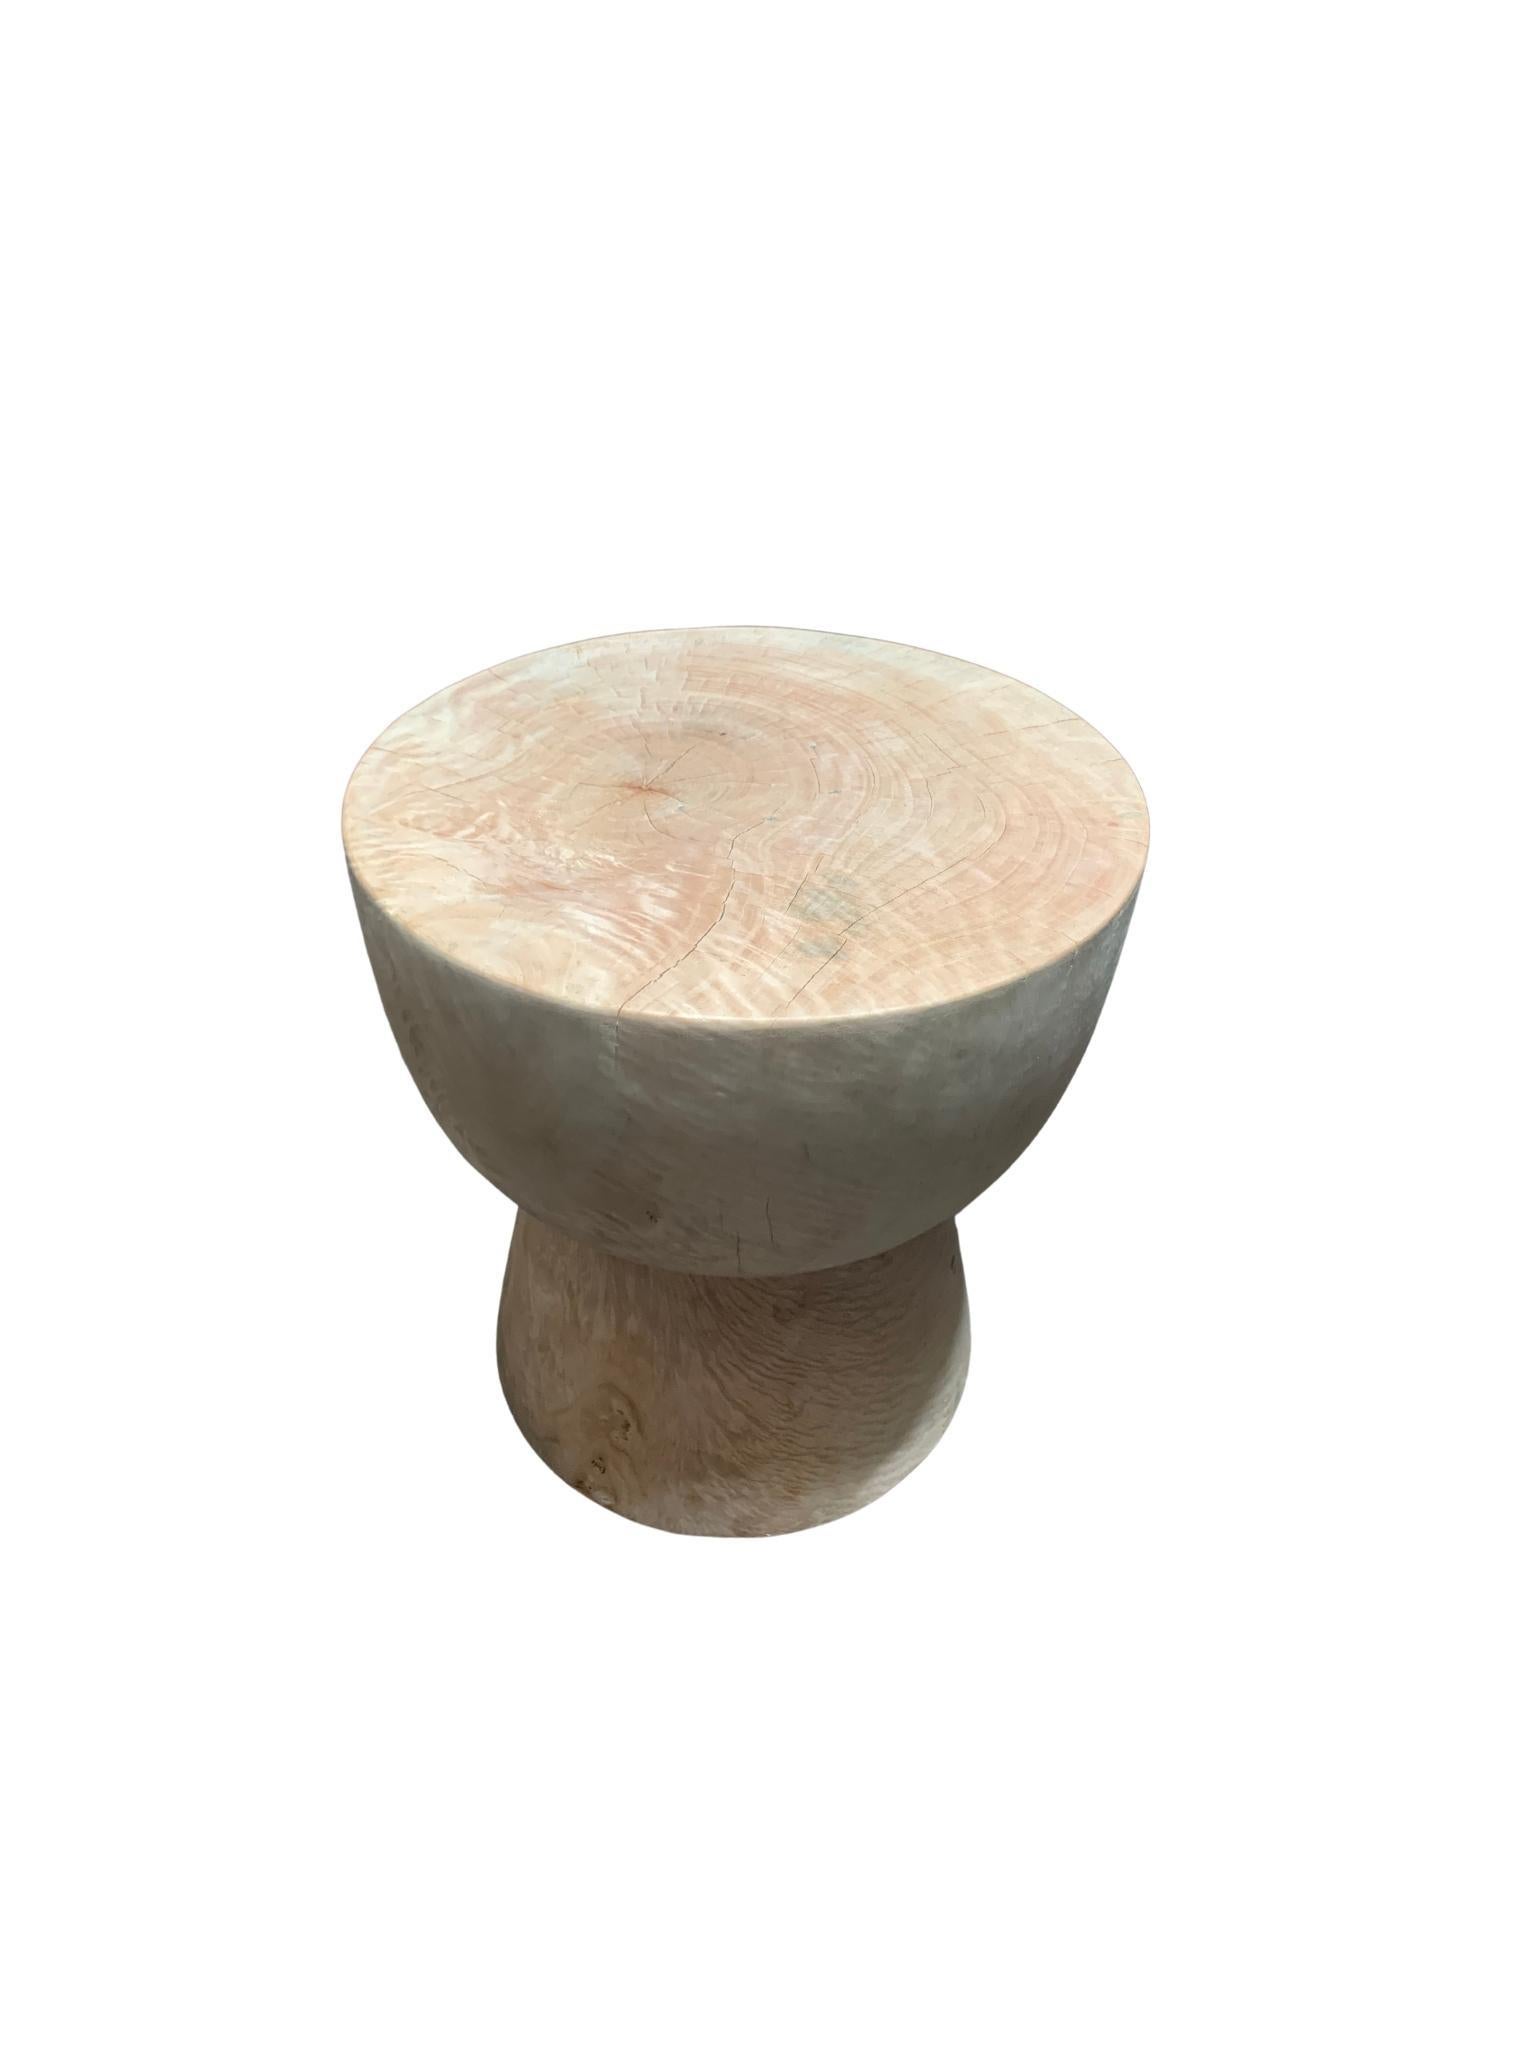 A wonderfully sculptural round side table. Its cream/white pigment was achieved through a bleaching process creating both a wonderful colour and effect. Its neutral pigment and subtle wood texture makes it perfect for any space. A uniquely